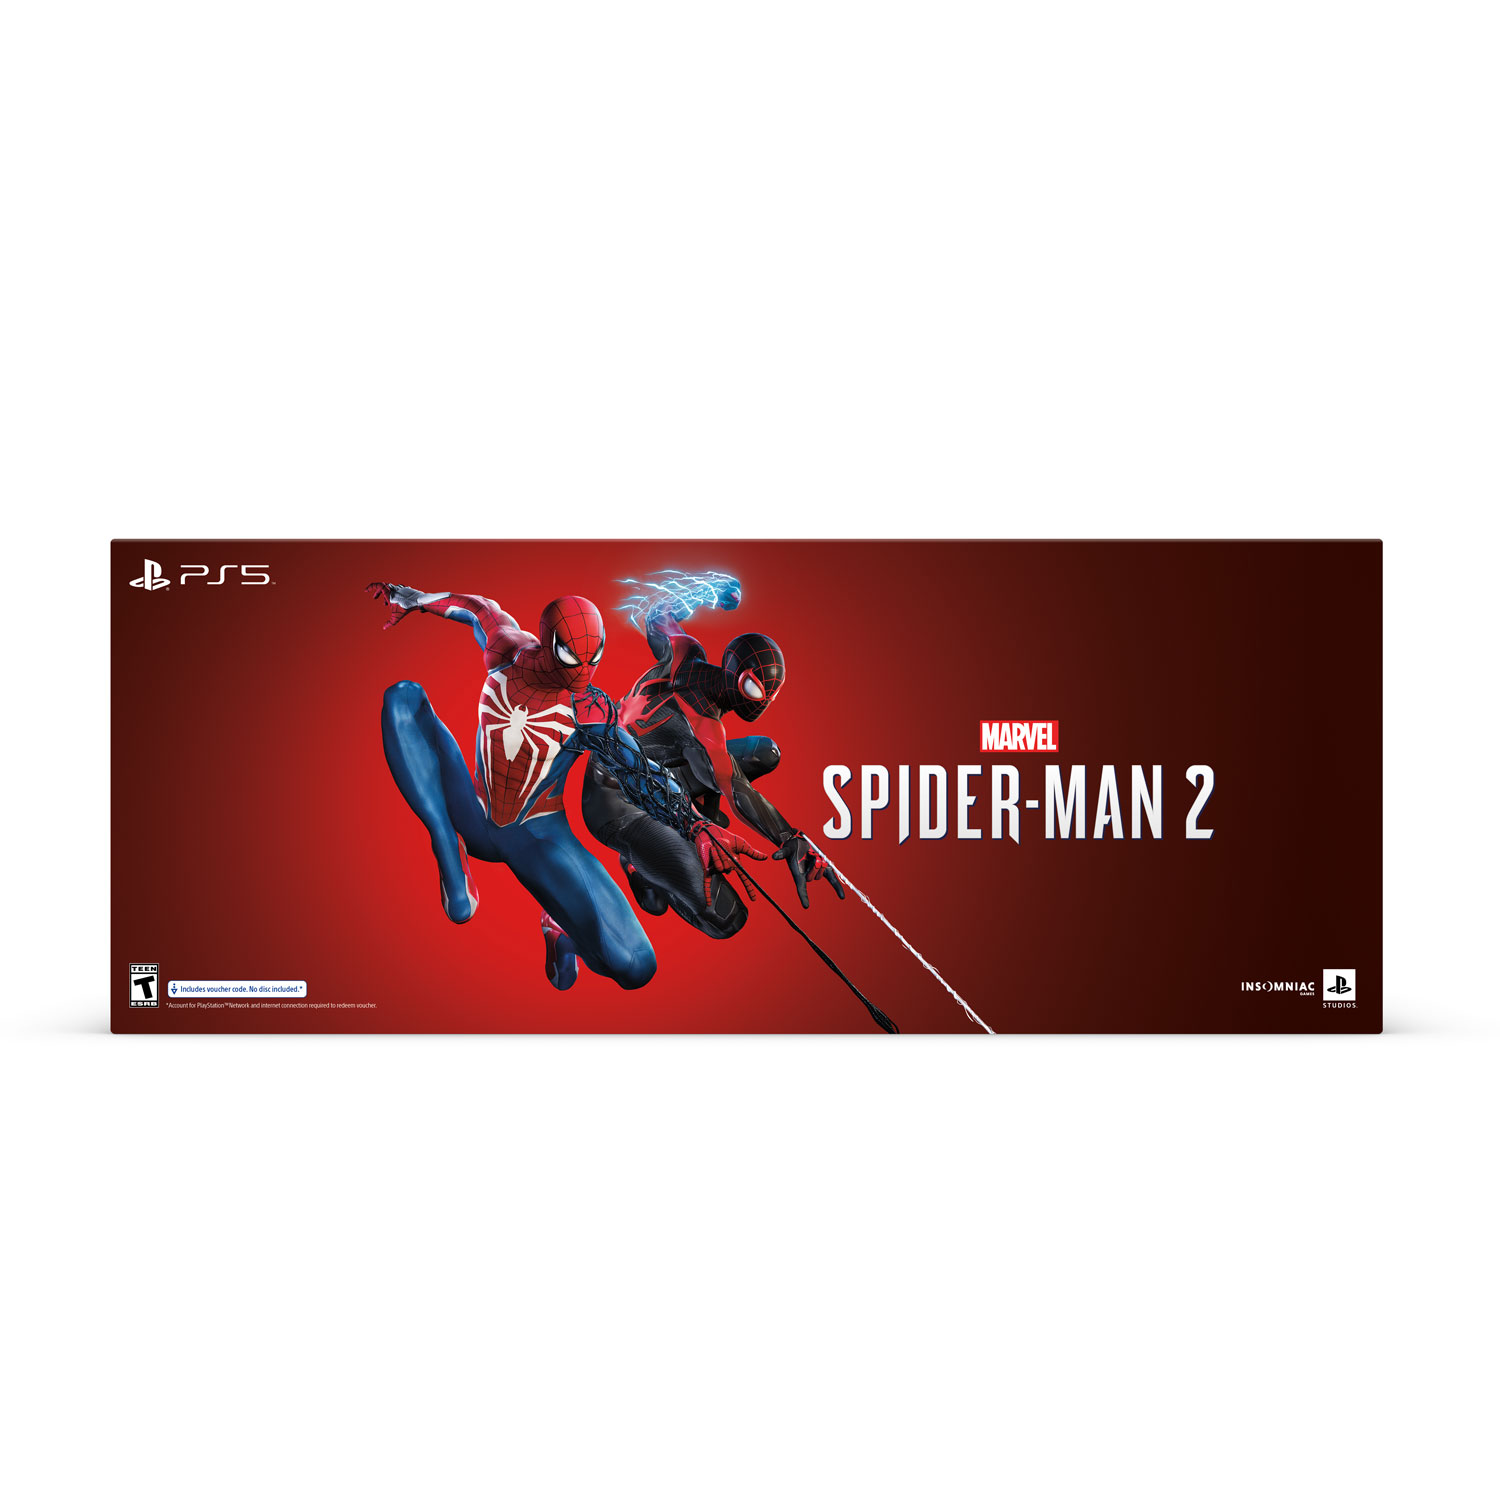 Spider-Man 2 Collector's Edition (PS5)